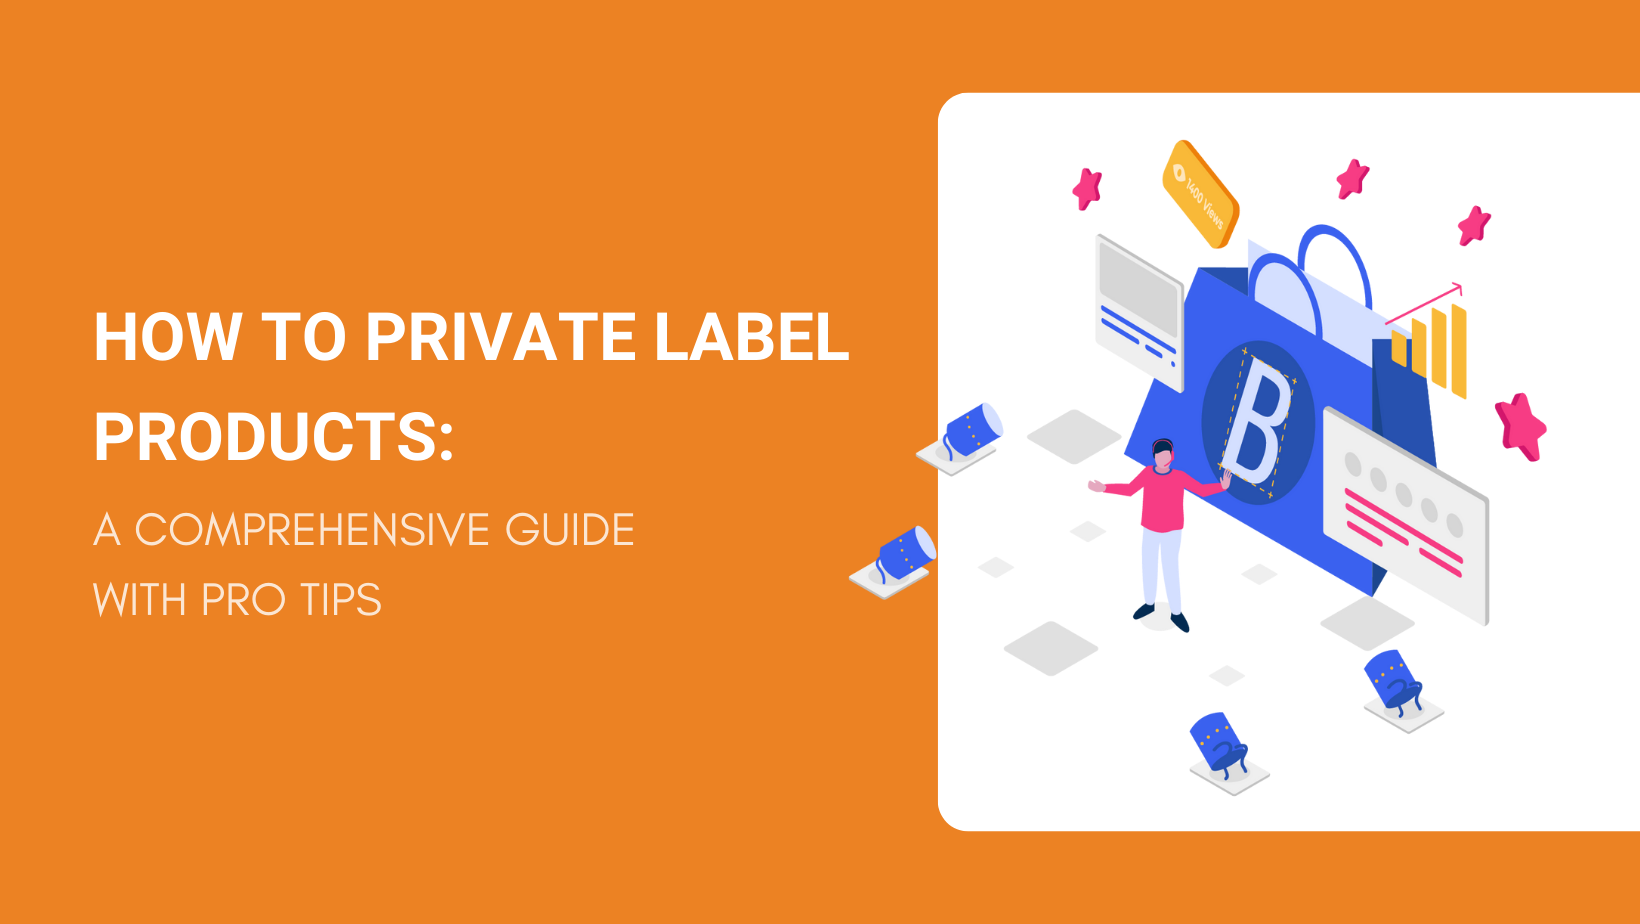 How to Private Label Products: A Comprehensive 2022 Guide with Pro Tips